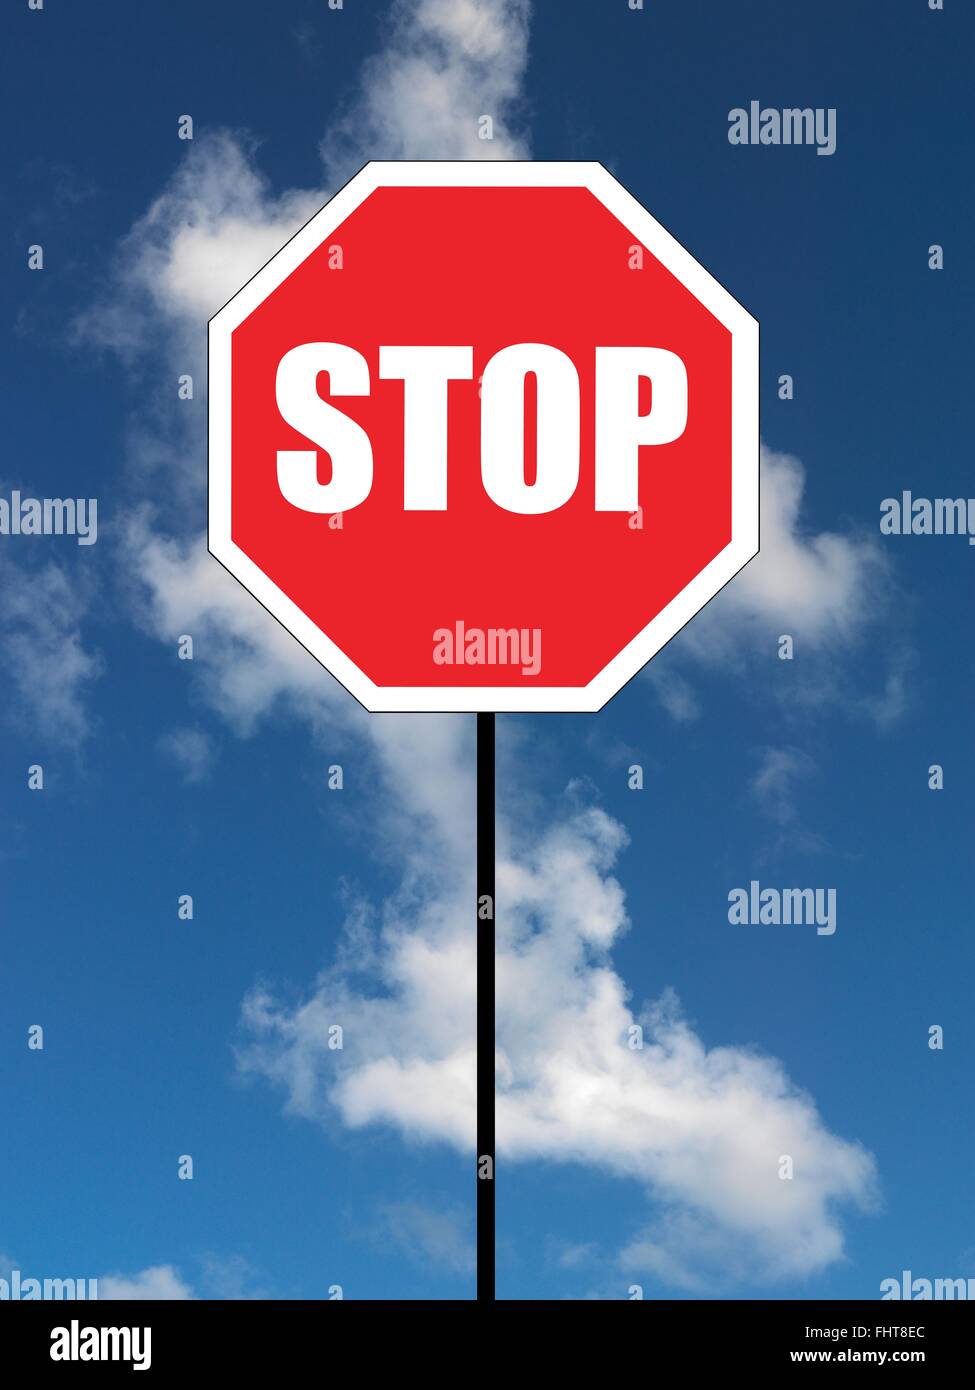 A close up shot of a red stop sign Stock Photo